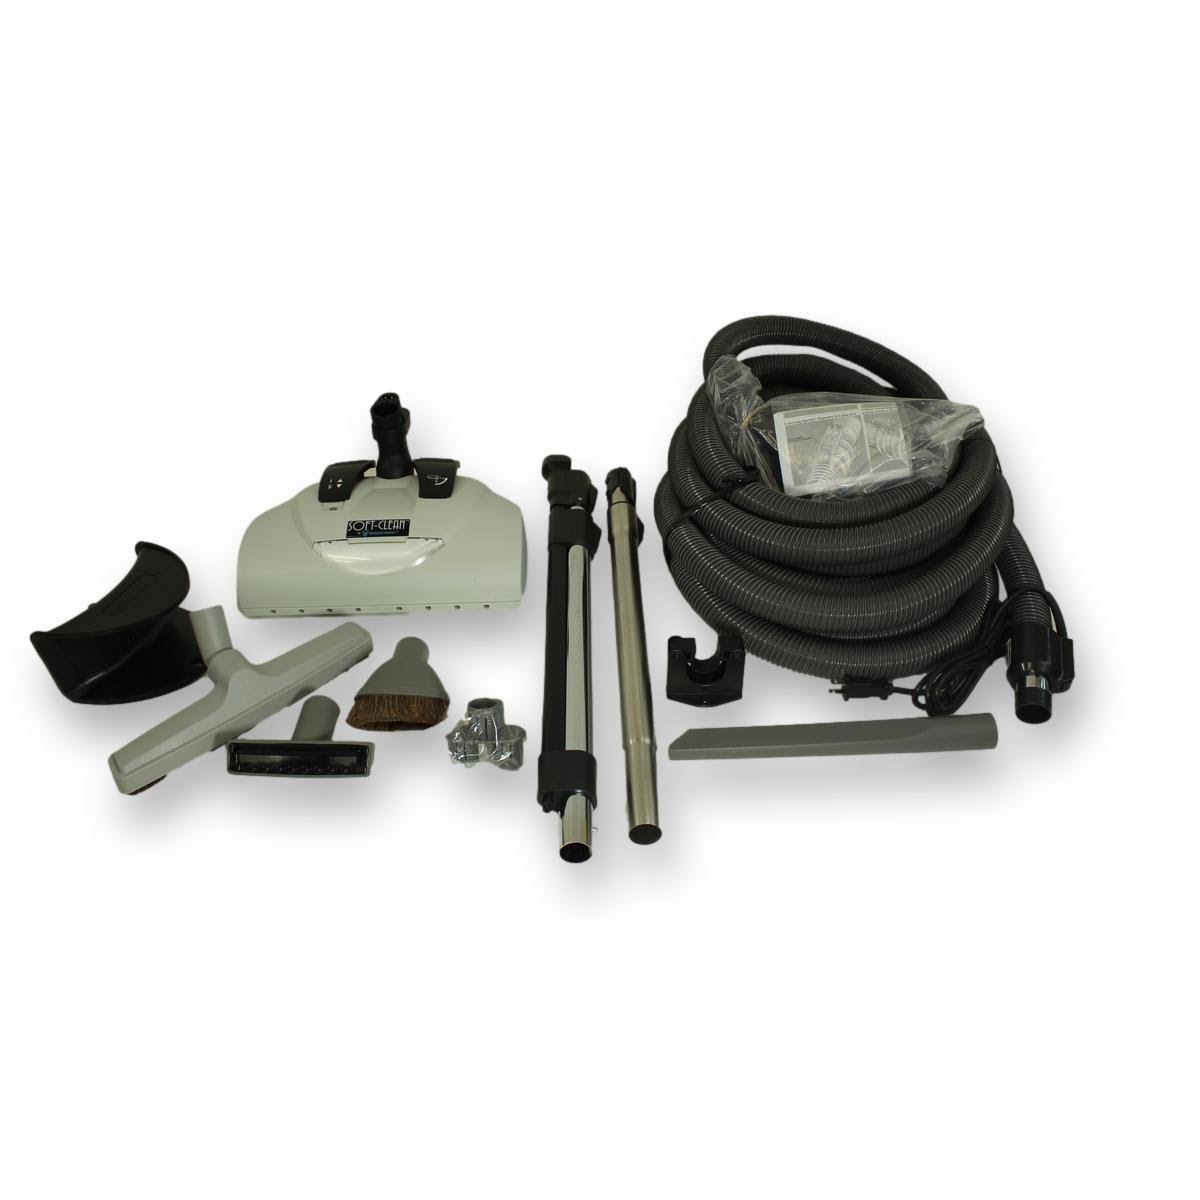 Beam Central Vacuum Cleaning Set EBK360SC Wessell Power Nozzle with 35ft Hose